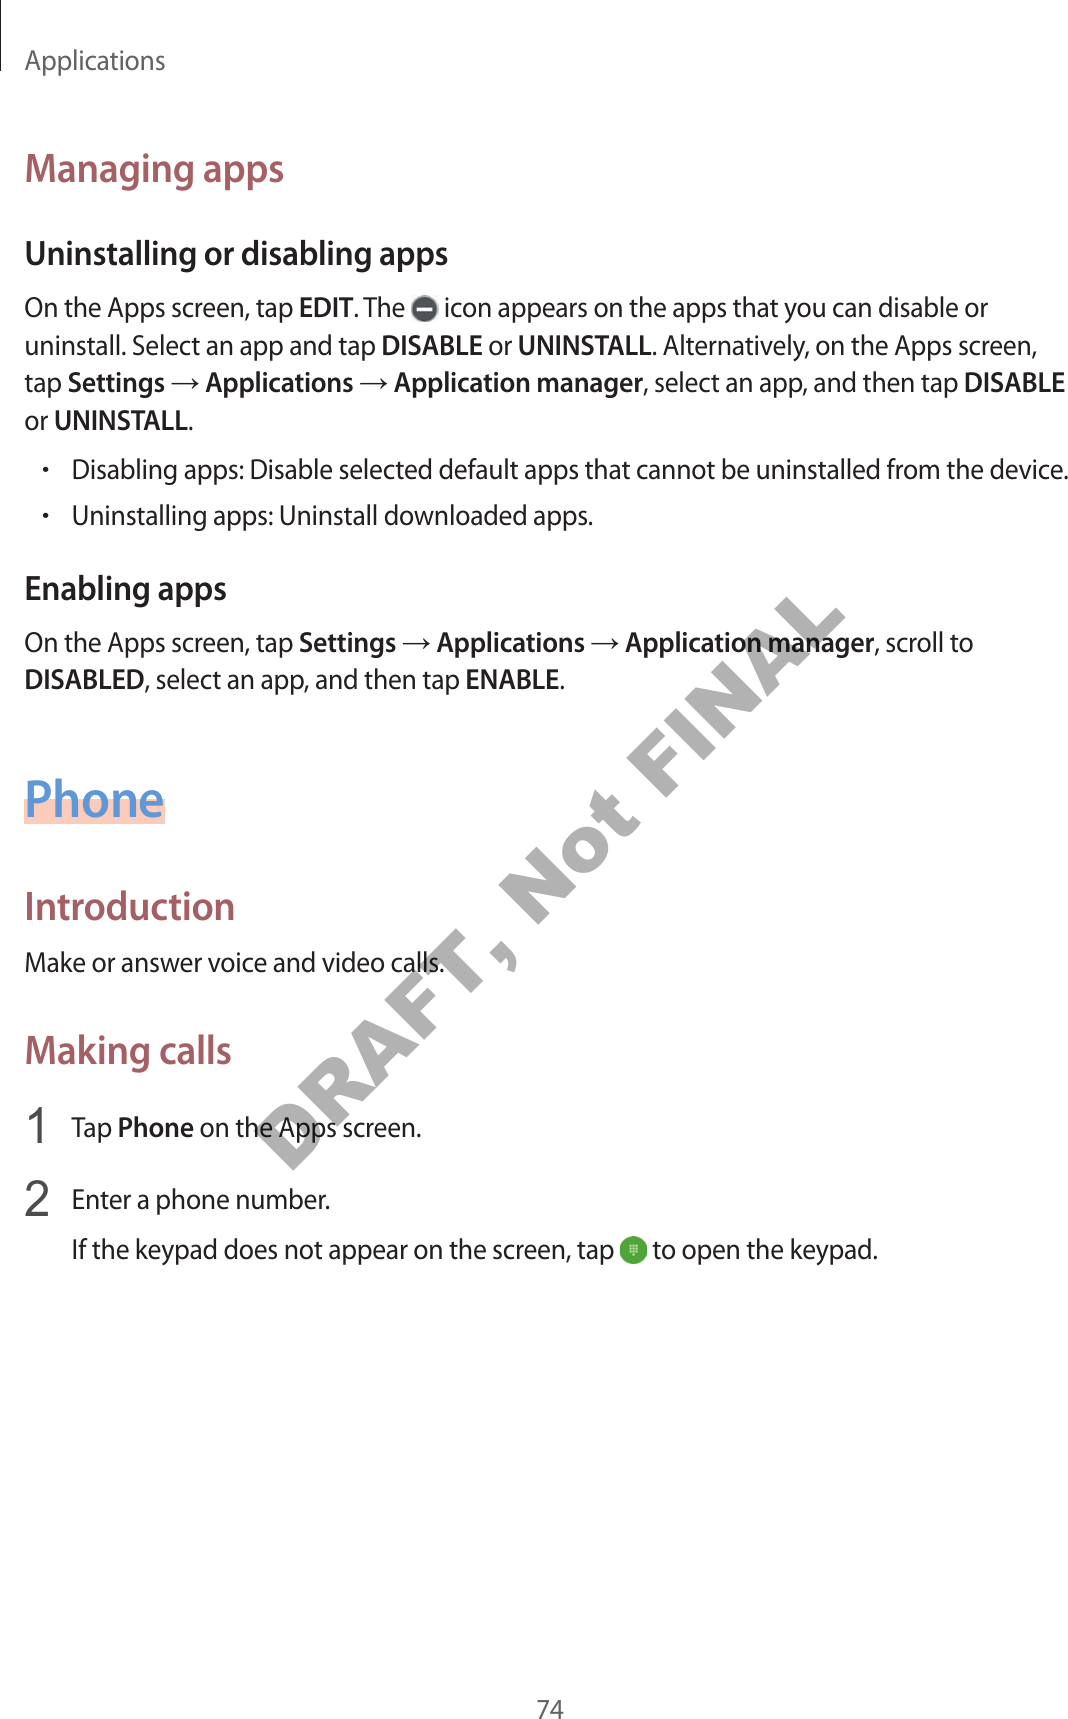 Applications74Managing appsUninstalling or disabling appsOn the Apps screen, tap EDIT. The   icon appears on the apps that you can disable or uninstall. Select an app and tap DISABLE or UNINSTALL. Alternatively, on the Apps screen, tap Settings ĺ Applications ĺ Application manager, select an app, and then tap DISABLE or UNINSTALL.•Disabling apps: Disable selected default apps that cannot be uninstalled from the device.•Uninstalling apps: Uninstall downloaded apps.Enabling appsOn the Apps screen, tap Settings ĺ Applications ĺ Application manager, scroll to DISABLED, select an app, and then tap ENABLE.PhoneIntroductionMake or answer voice and video calls.Making calls1  Tap Phone on the Apps screen.2  Enter a phone number.If the keypad does not appear on the screen, tap   to open the keypad.DRAFT, Not FINAL